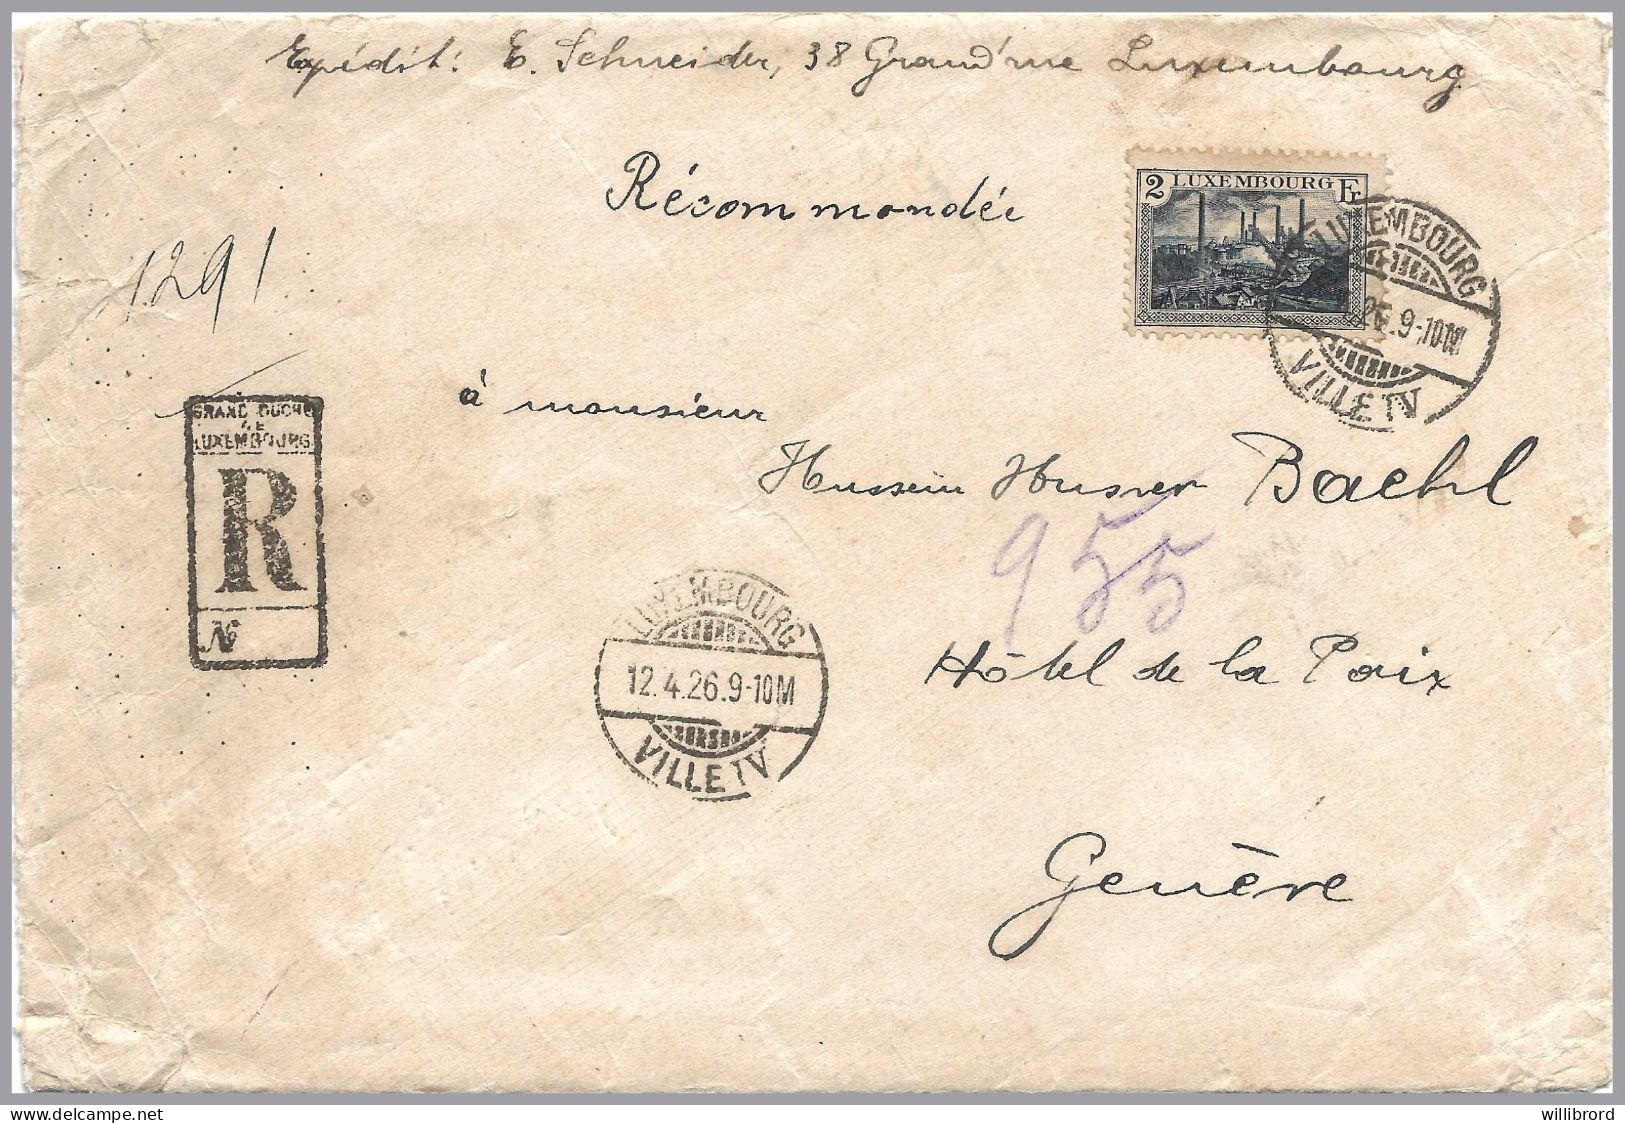 LUXEMBOURG - 1932 Blue 2F Esch Foundries SOLE USE - Registered To GENEVA SWITZERLAND - Scarce 2F UPU Registry Rate! - Lettres & Documents